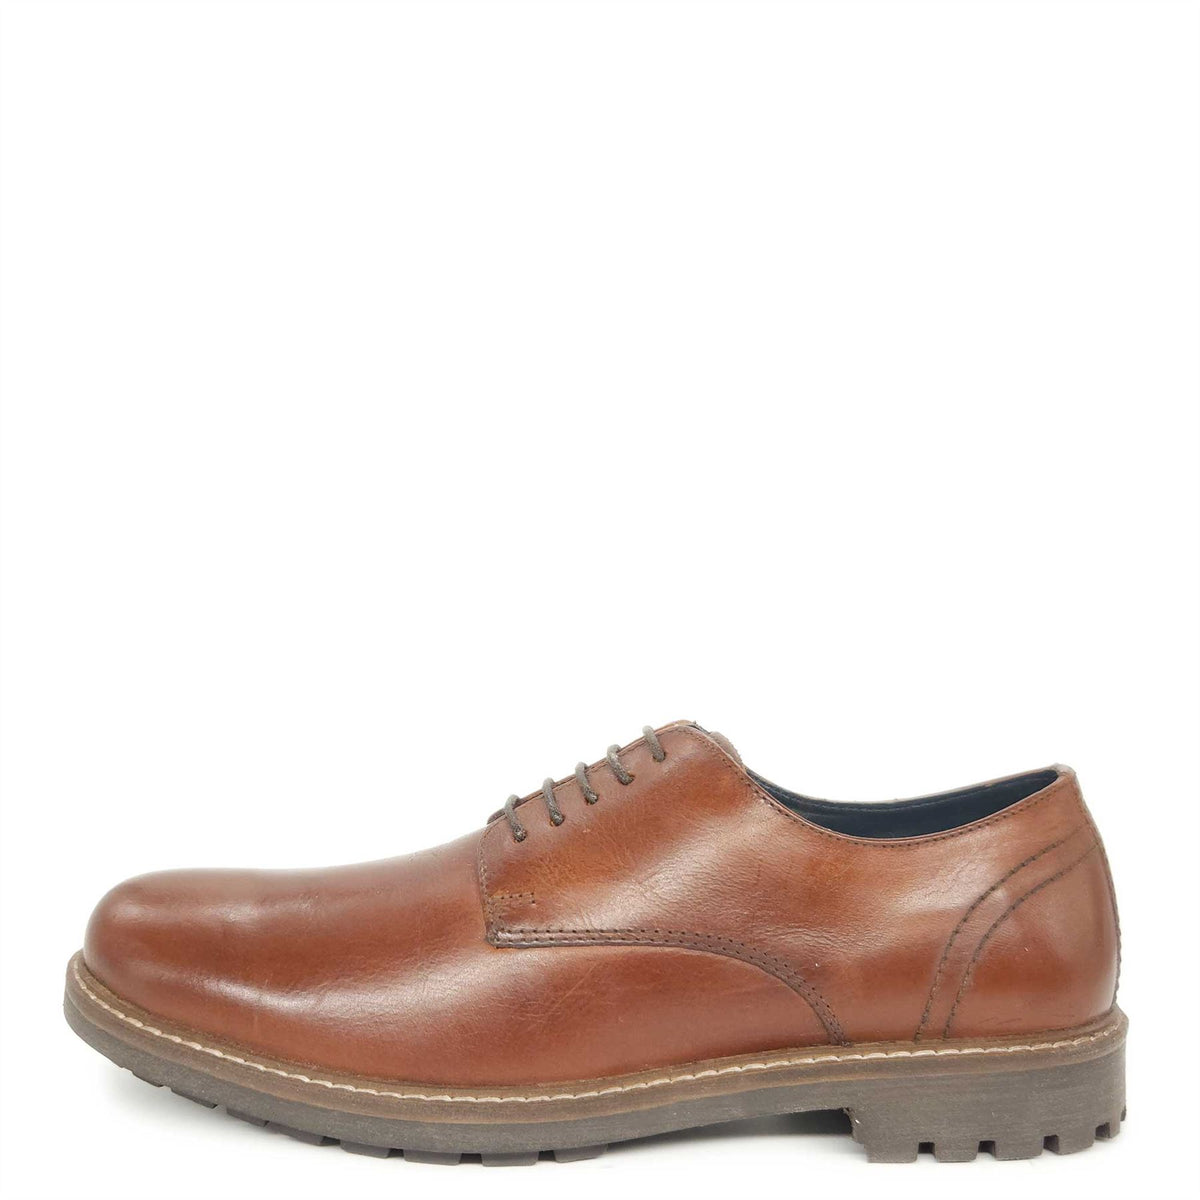 Red Tape Crick Risley Mens Leather Casual Oxford Shoes